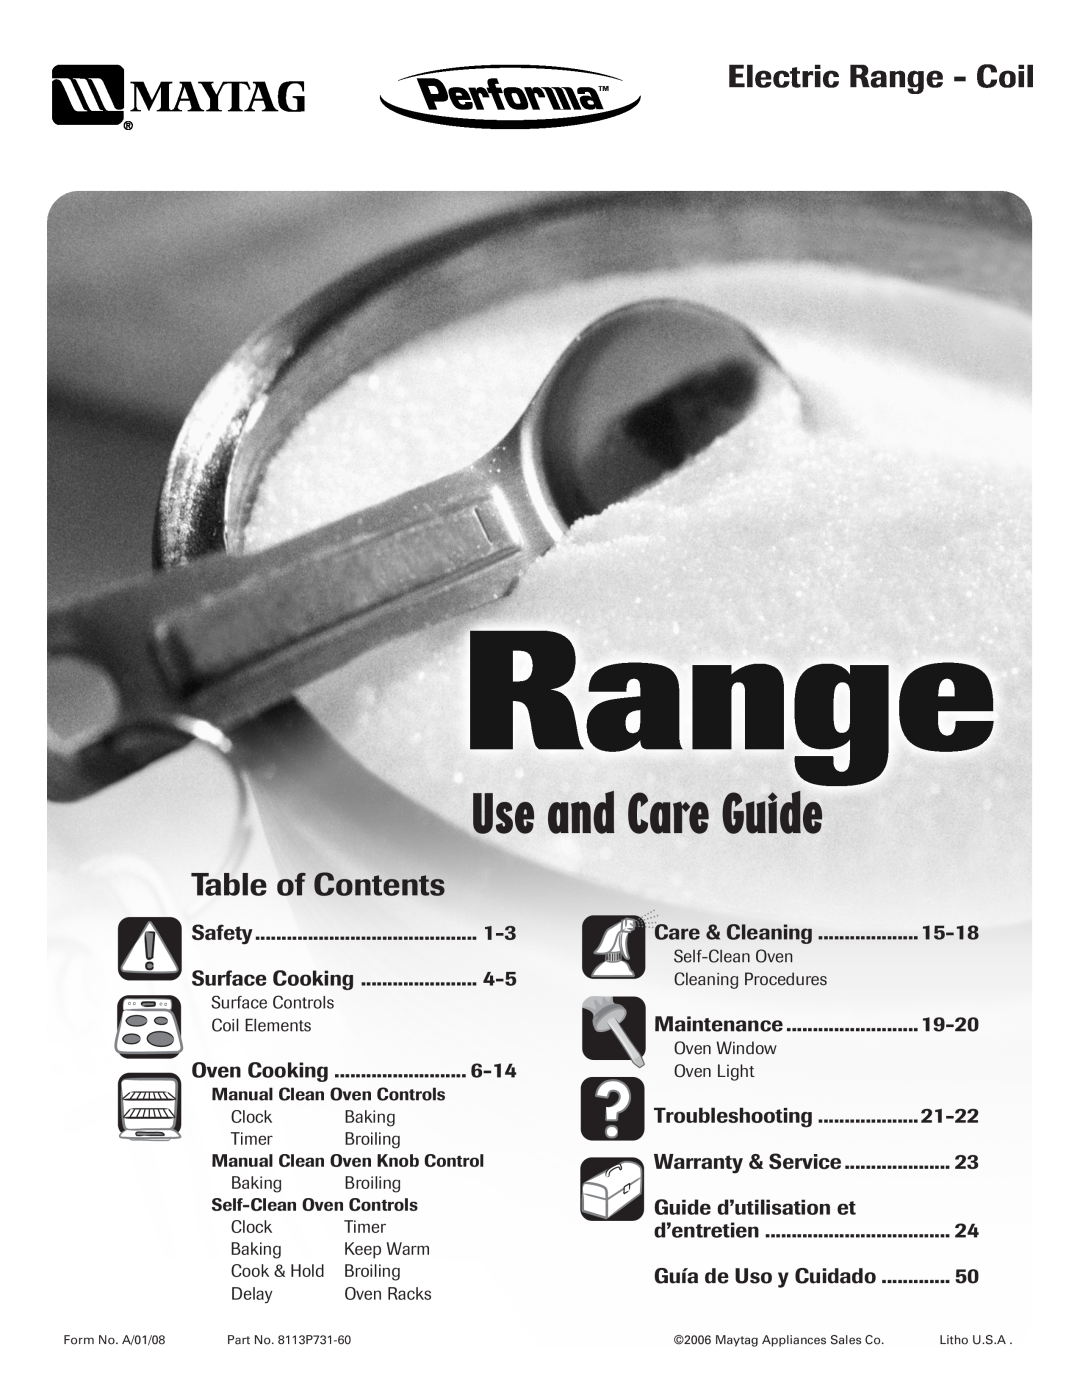 Maytag MER5552BAW warranty Use and Care Guide, Electric Range - Coil, Table of Contents 